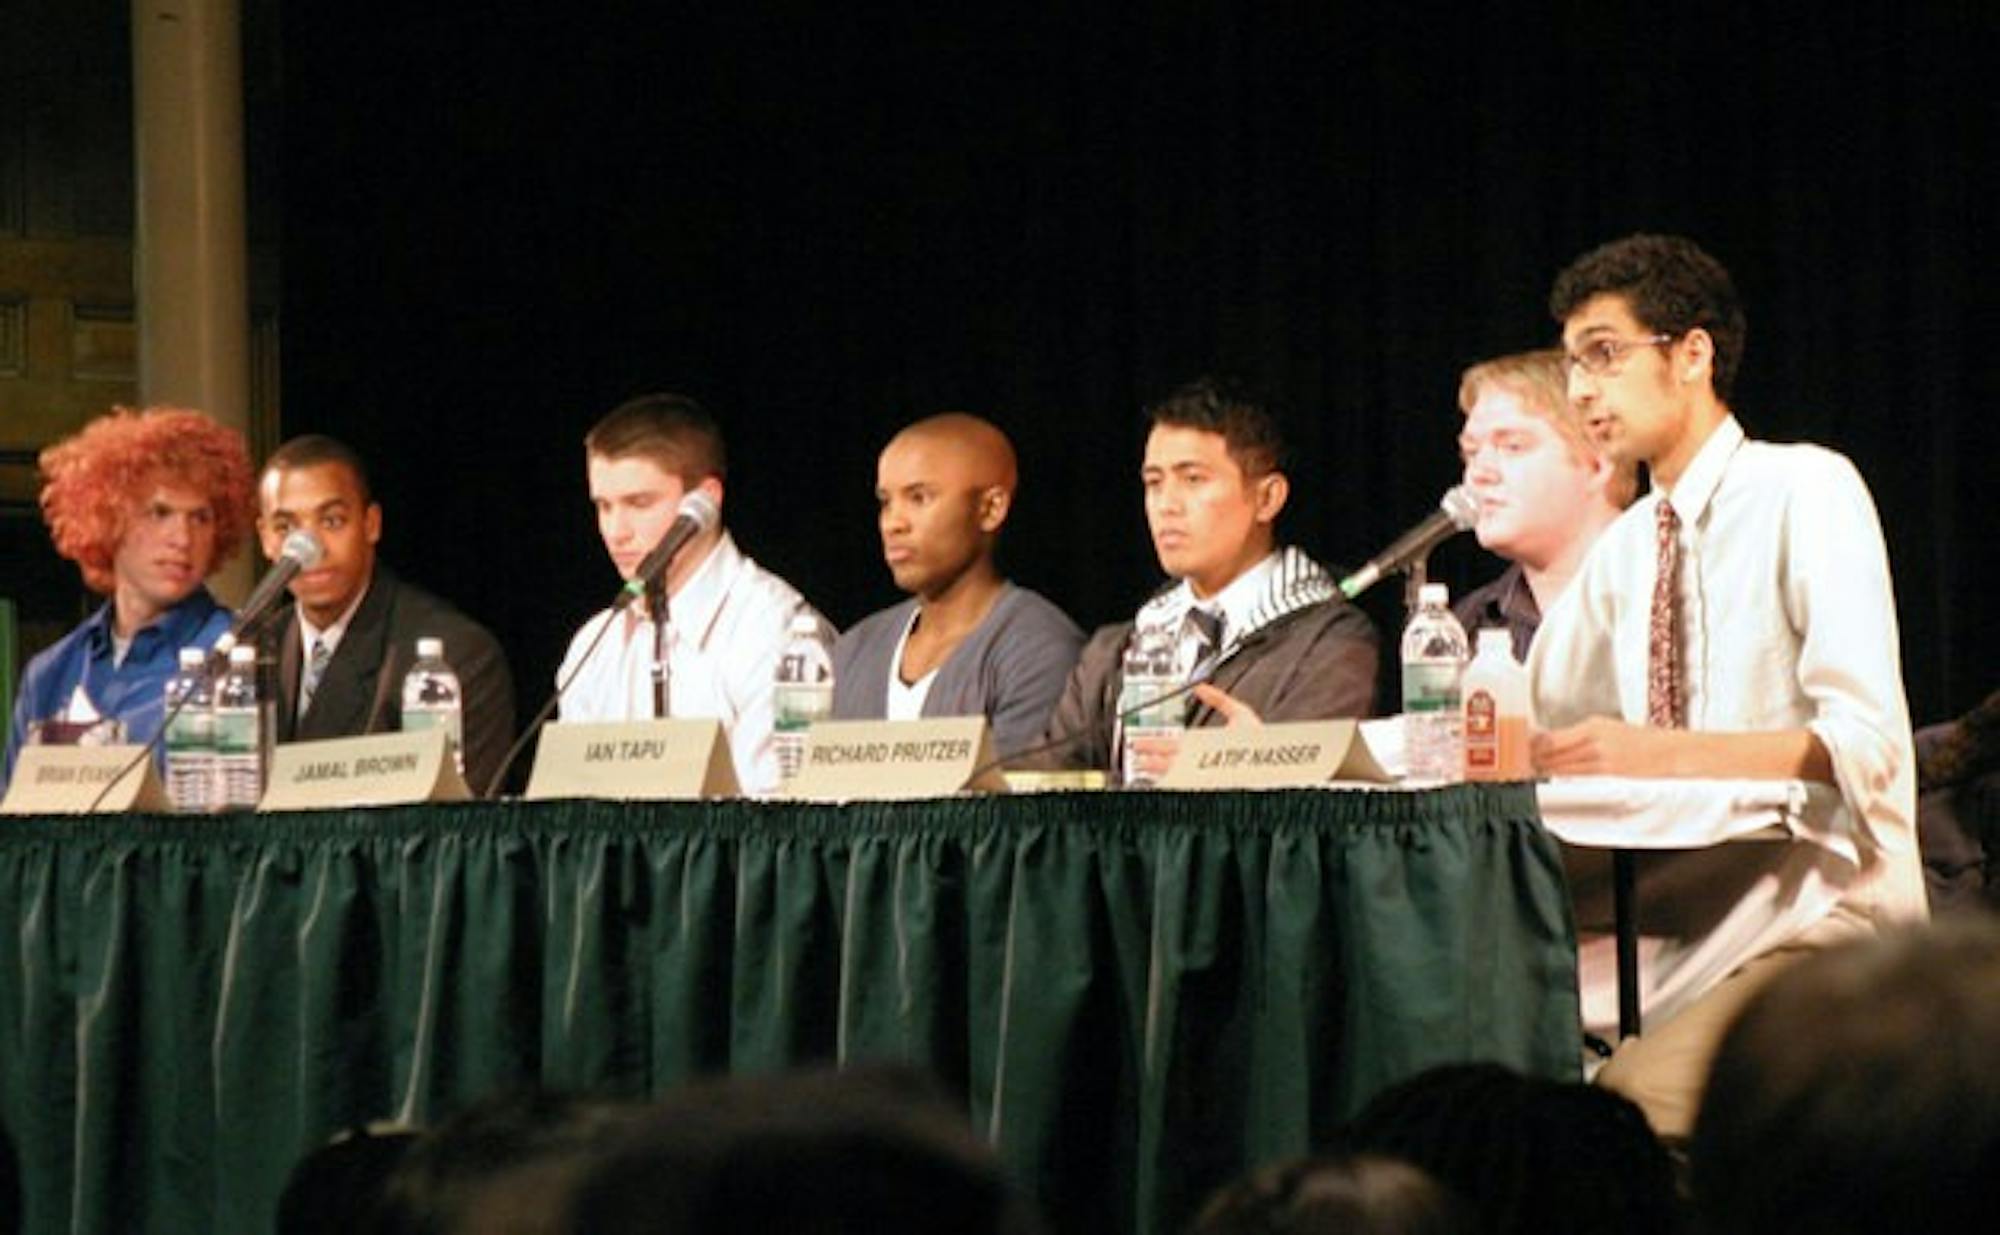 Seven senior men spoke about their personal life experiences at the first-ever 